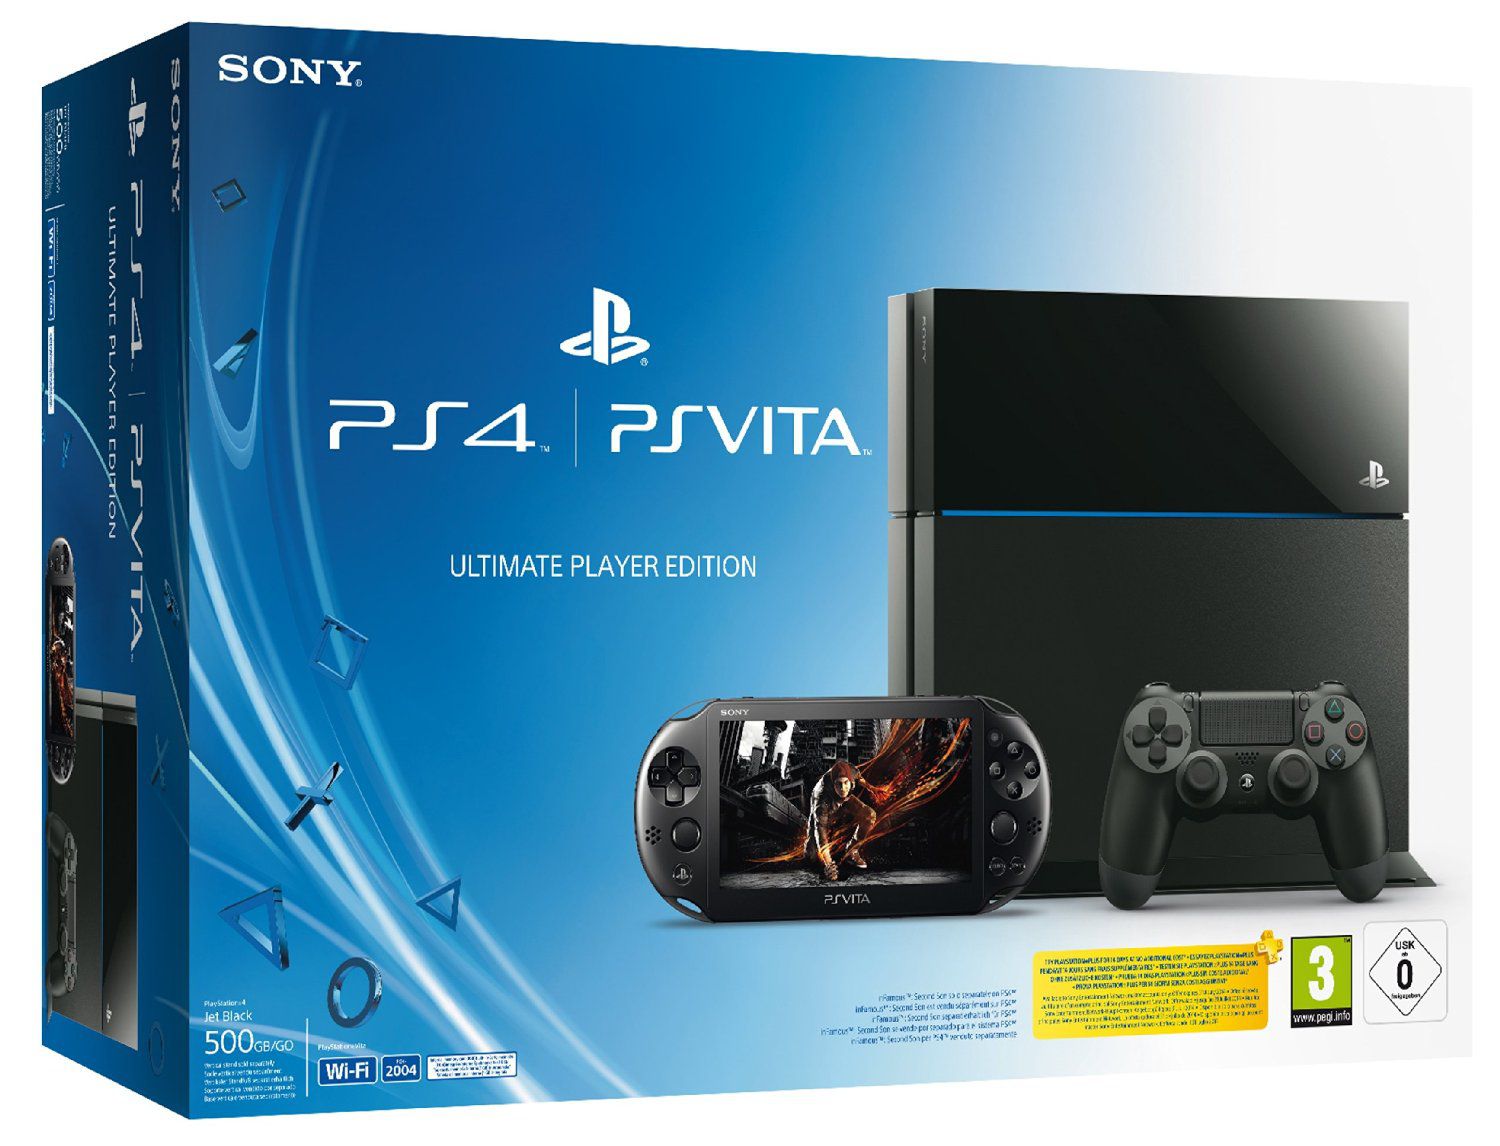 PS4 PS Vita Ultimate Player Edition